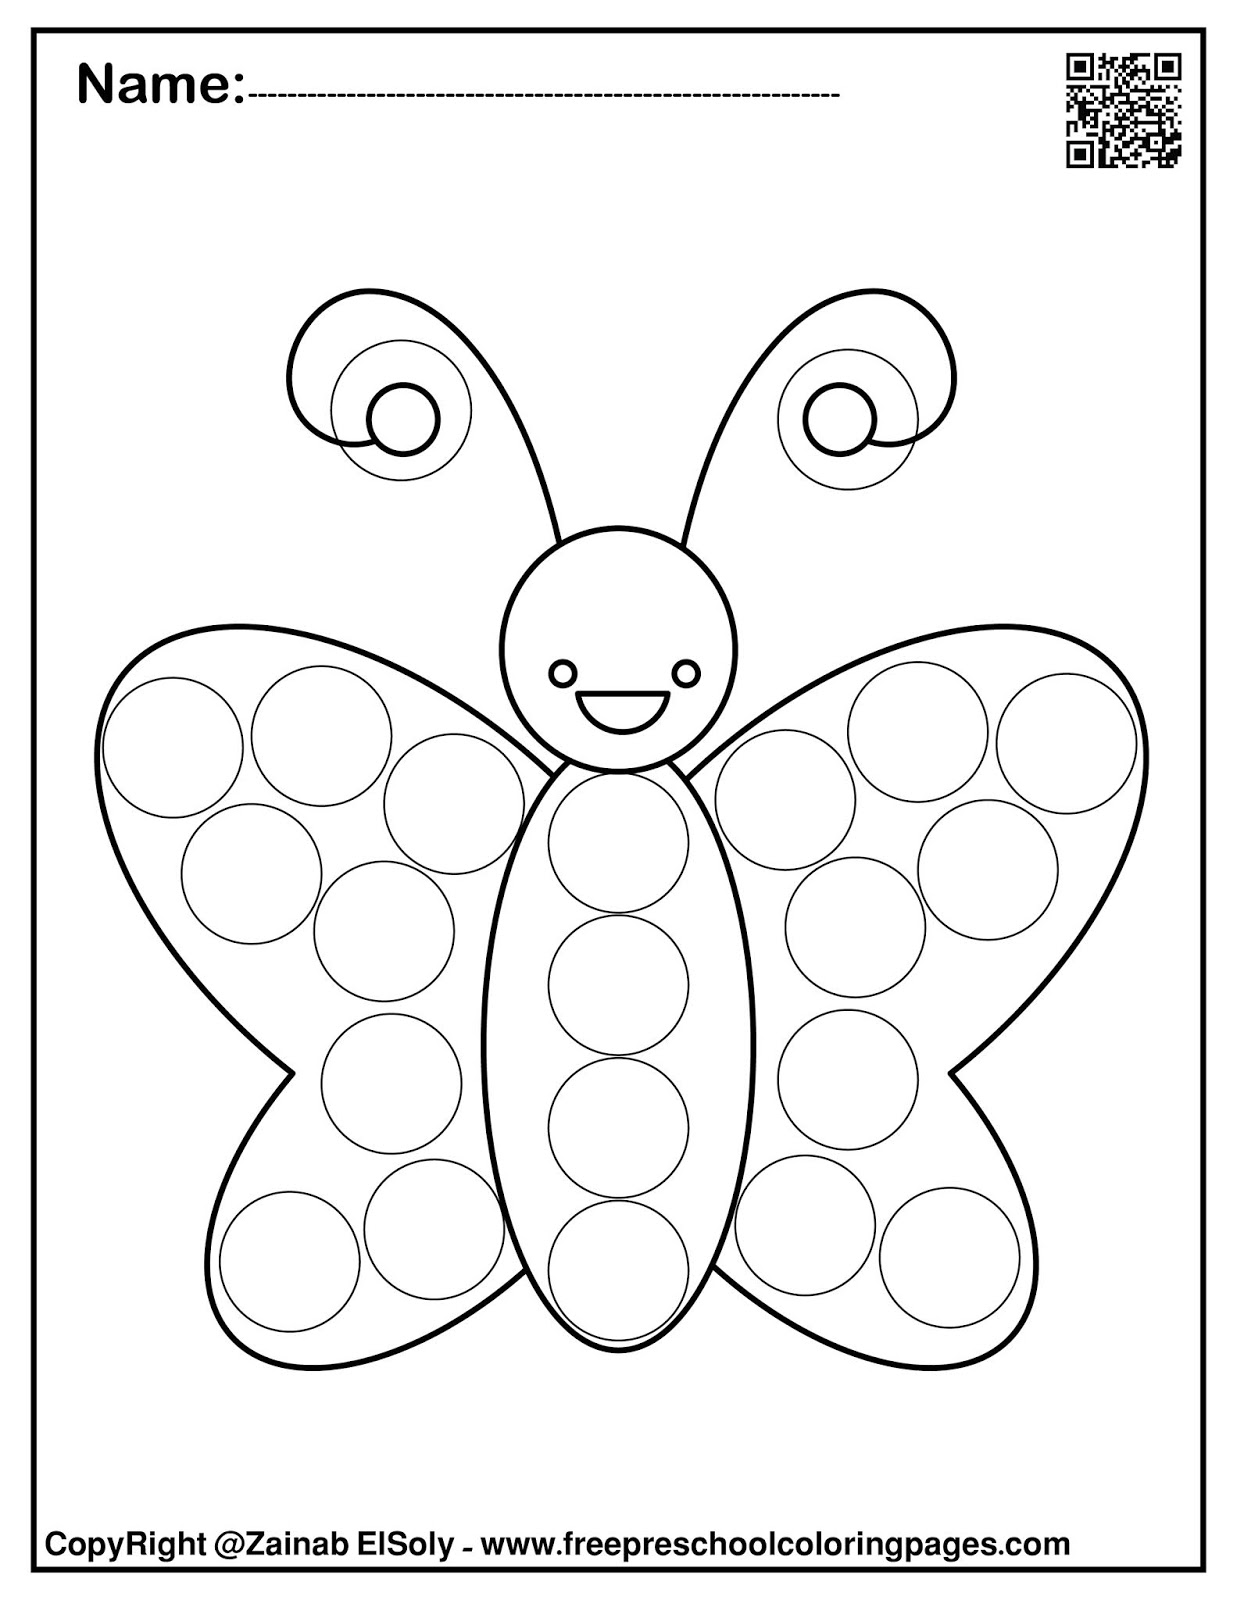 Free Printable Dot Coloring Pages